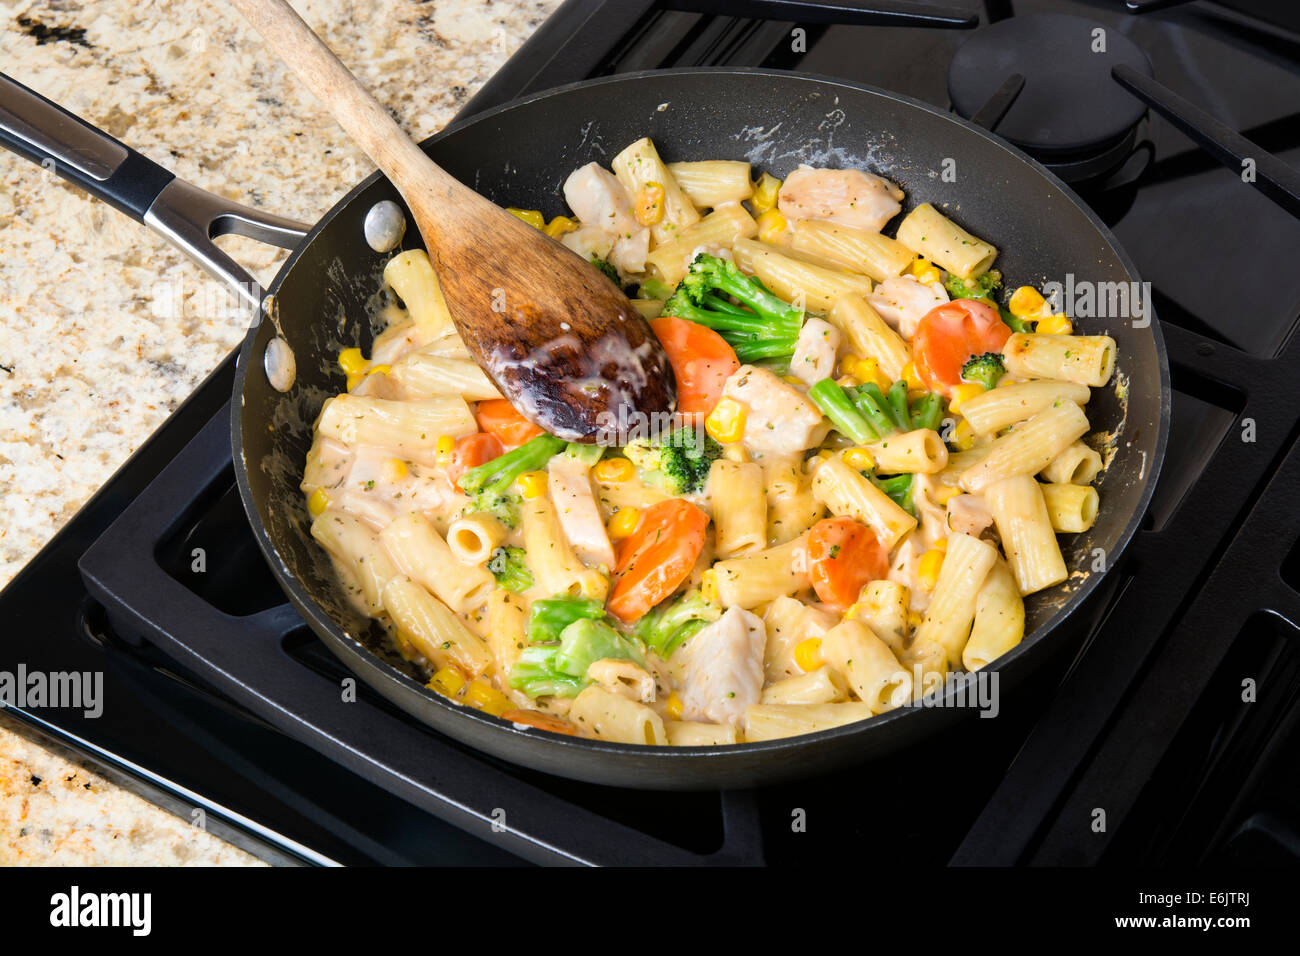 Freshly cooked pasta with vegetables, chicken and cream sauce in a stove top simmering pan Stock Photo